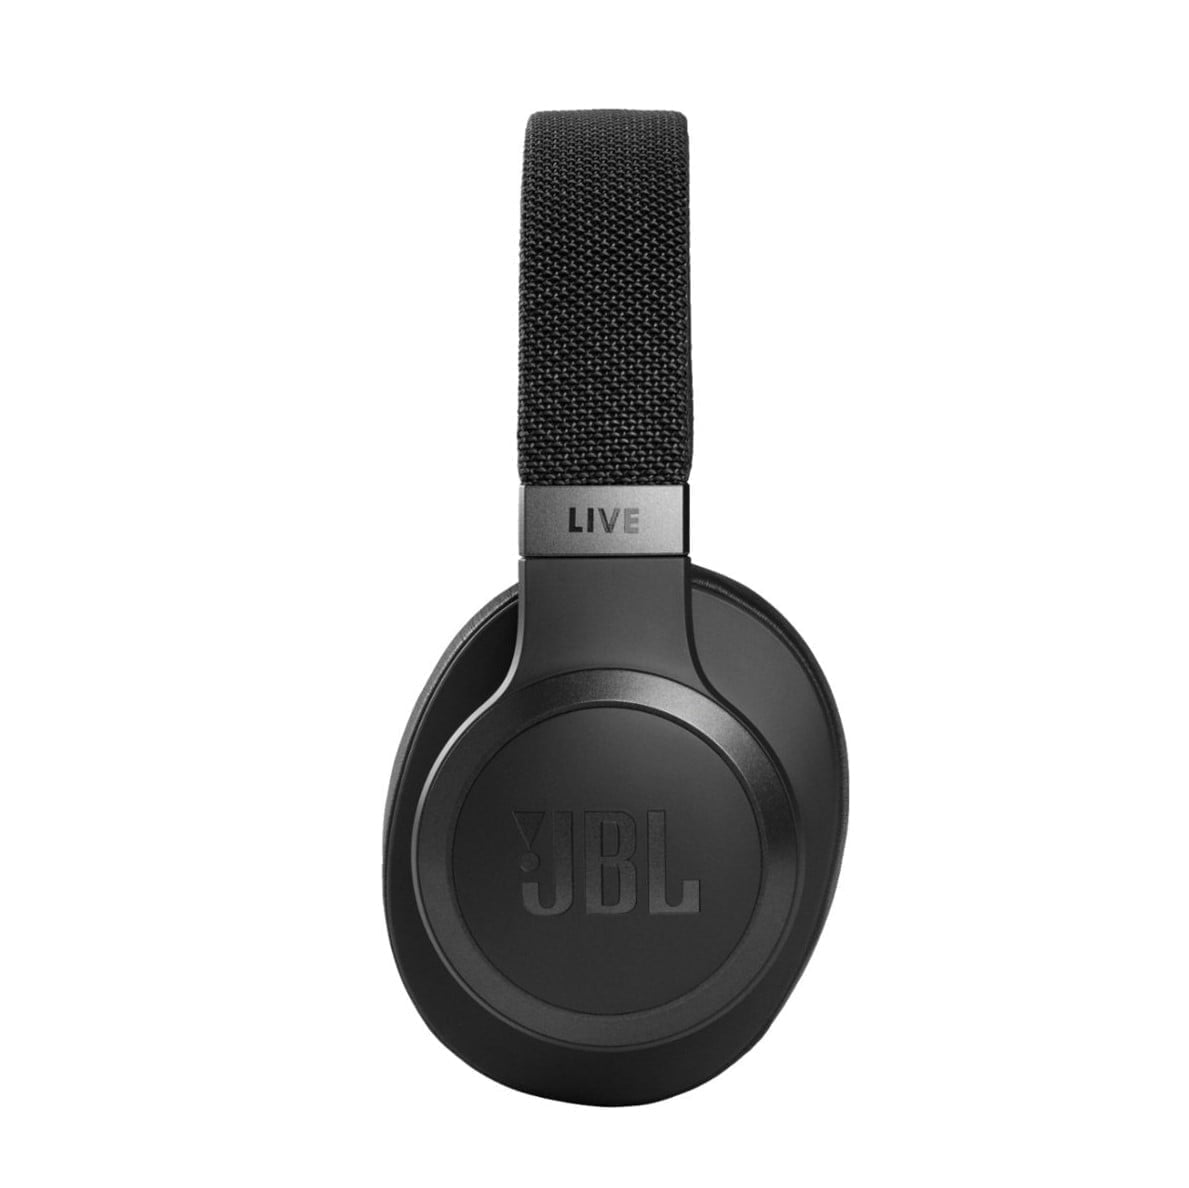 6463749Ld Jbl &Lt;H1&Gt;Jbl Live 660Nc Wireless Noise Cancelling Headphones - Black&Lt;/H1&Gt; Https://Www.youtube.com/Watch?V=Lr2Xbmbdmey In Your World, Music Is Essential, So Slip On A Pair Of Jbl Live 660Nc And Elevate Your Day. Feel The Power Of Jbl Signature Sound Delivered By 40Mm Drivers, Enjoy The Convenience Of Adaptive Noise Cancelling And Smart Ambient Technologies That Allow You To Focus On What Matters For You, And Talk To Your Favorite Voice Assistant With A Tap On The Ear Cup. Rock Out Uninterruptedly For 50 Hours! Jbl Jbl Live 660Nc Wireless Noise Cancelling Headphones - Black